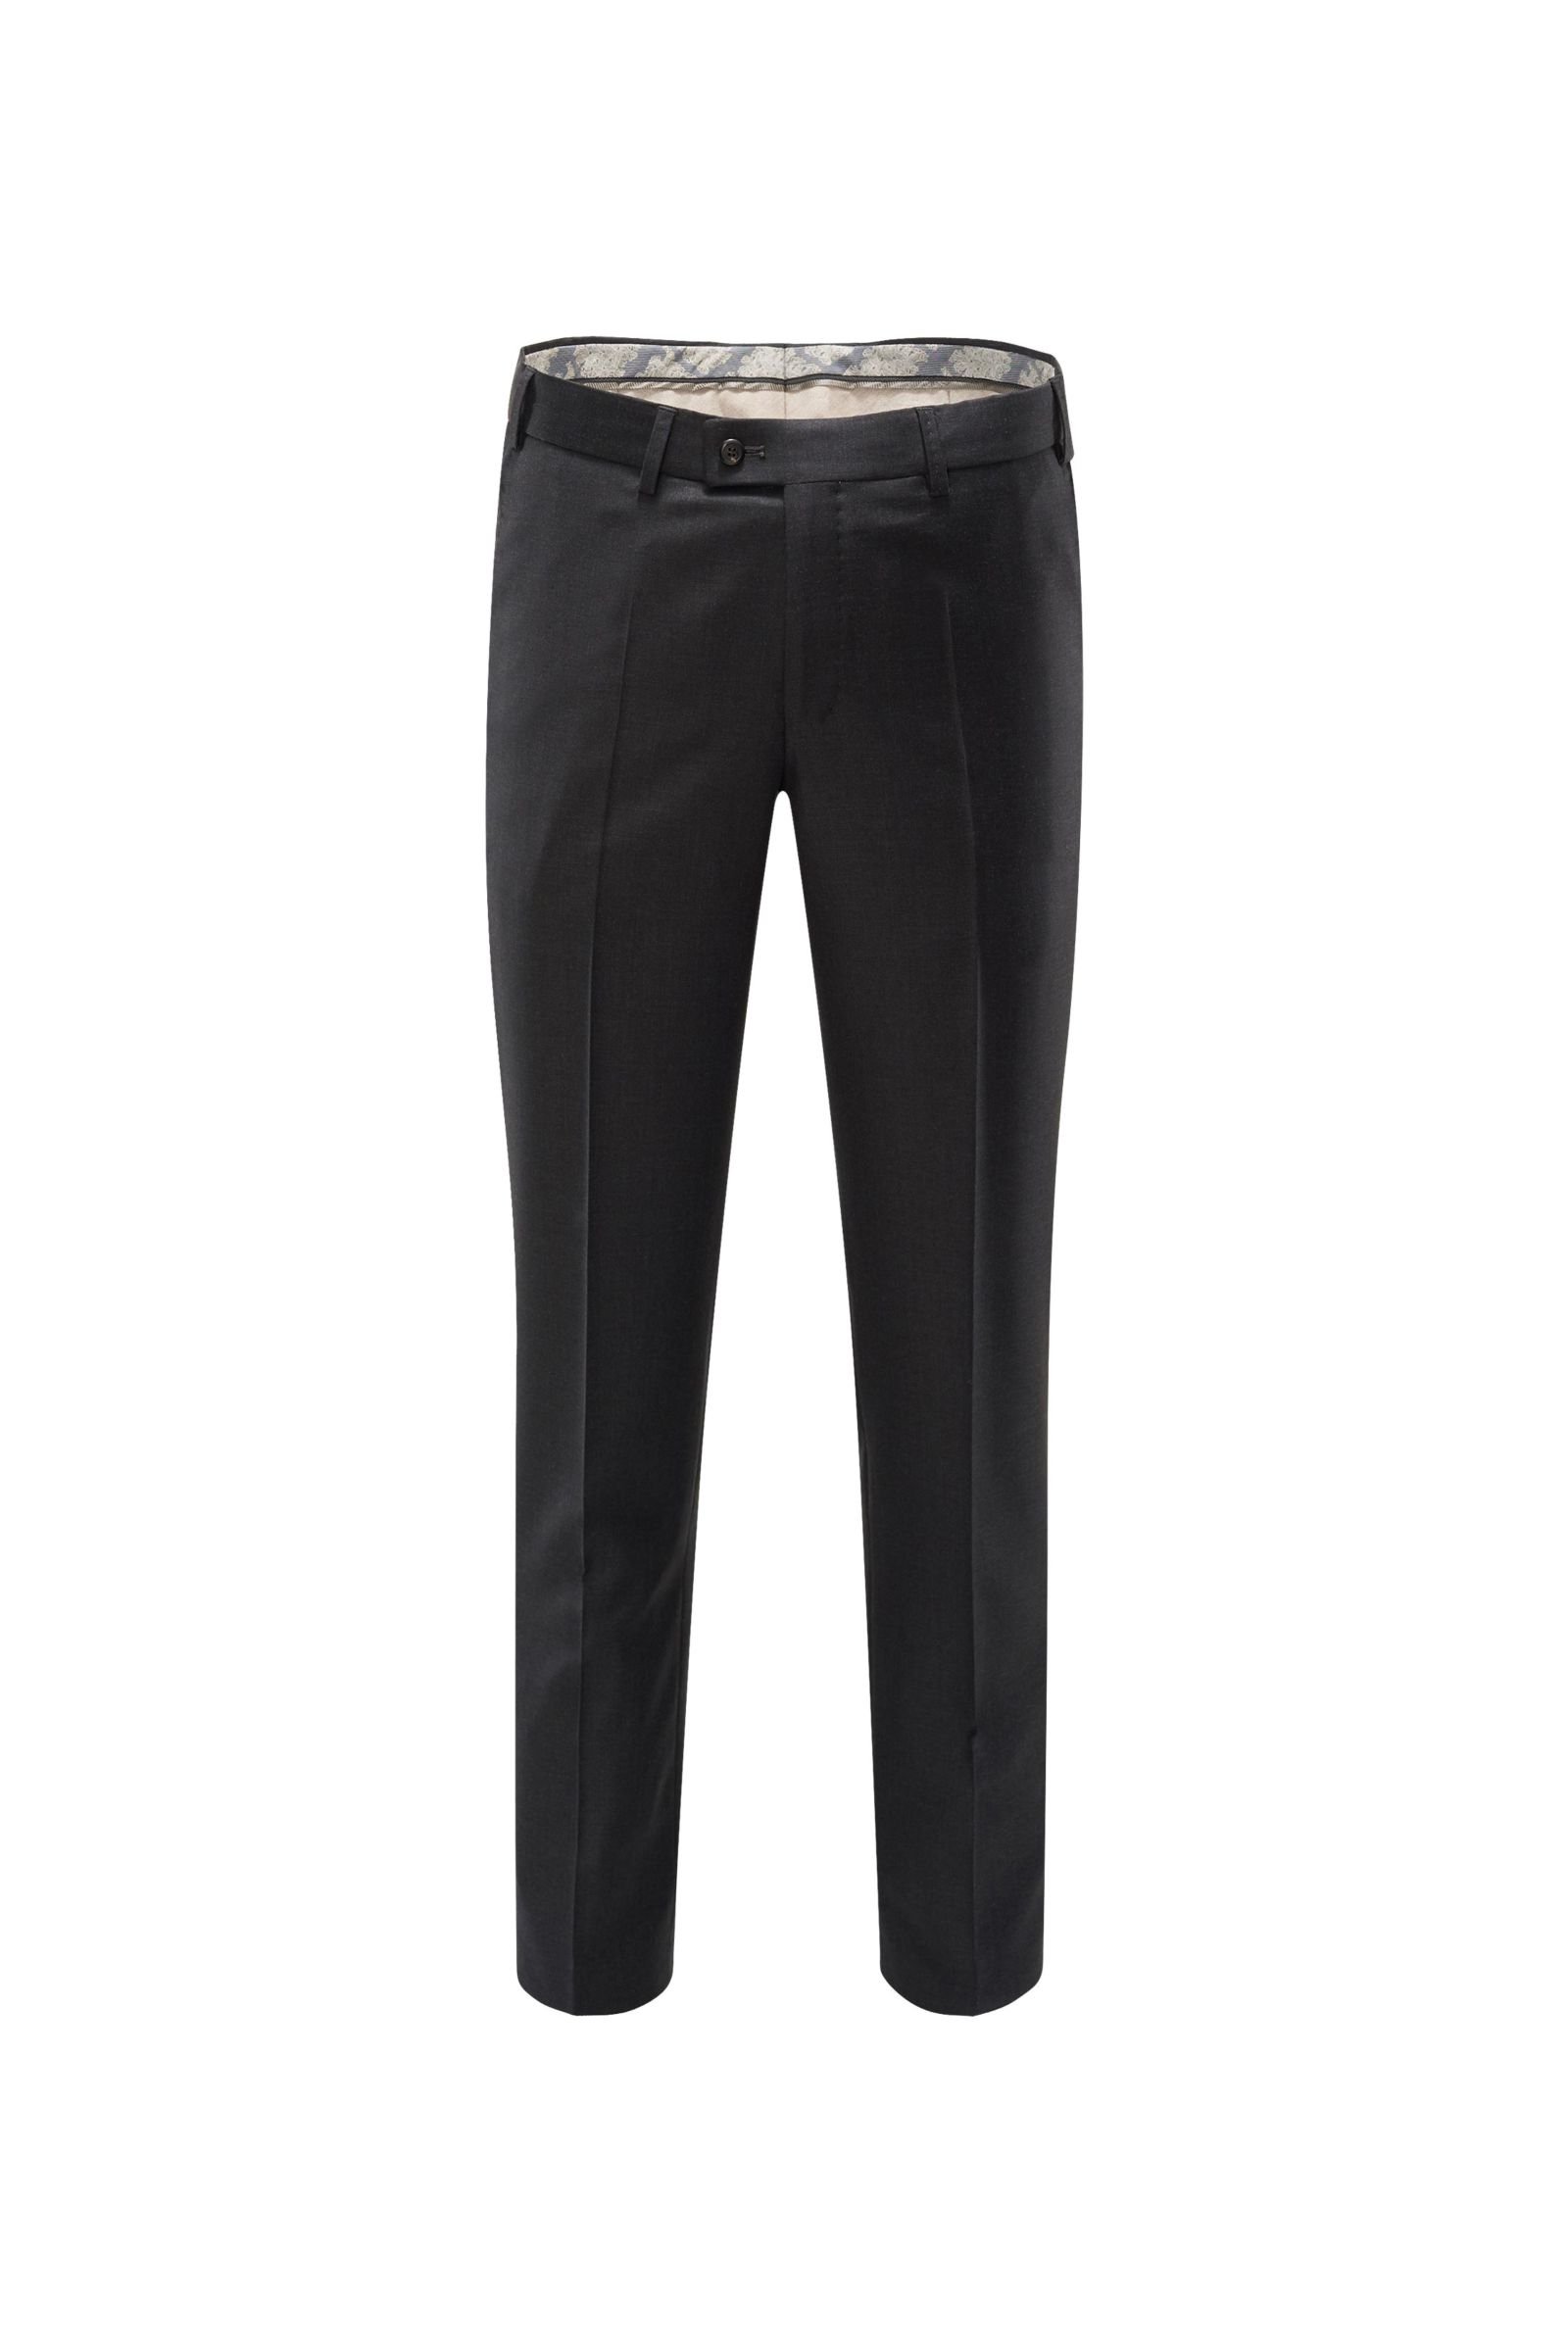 Wool trousers 'Piacenza' anthracite